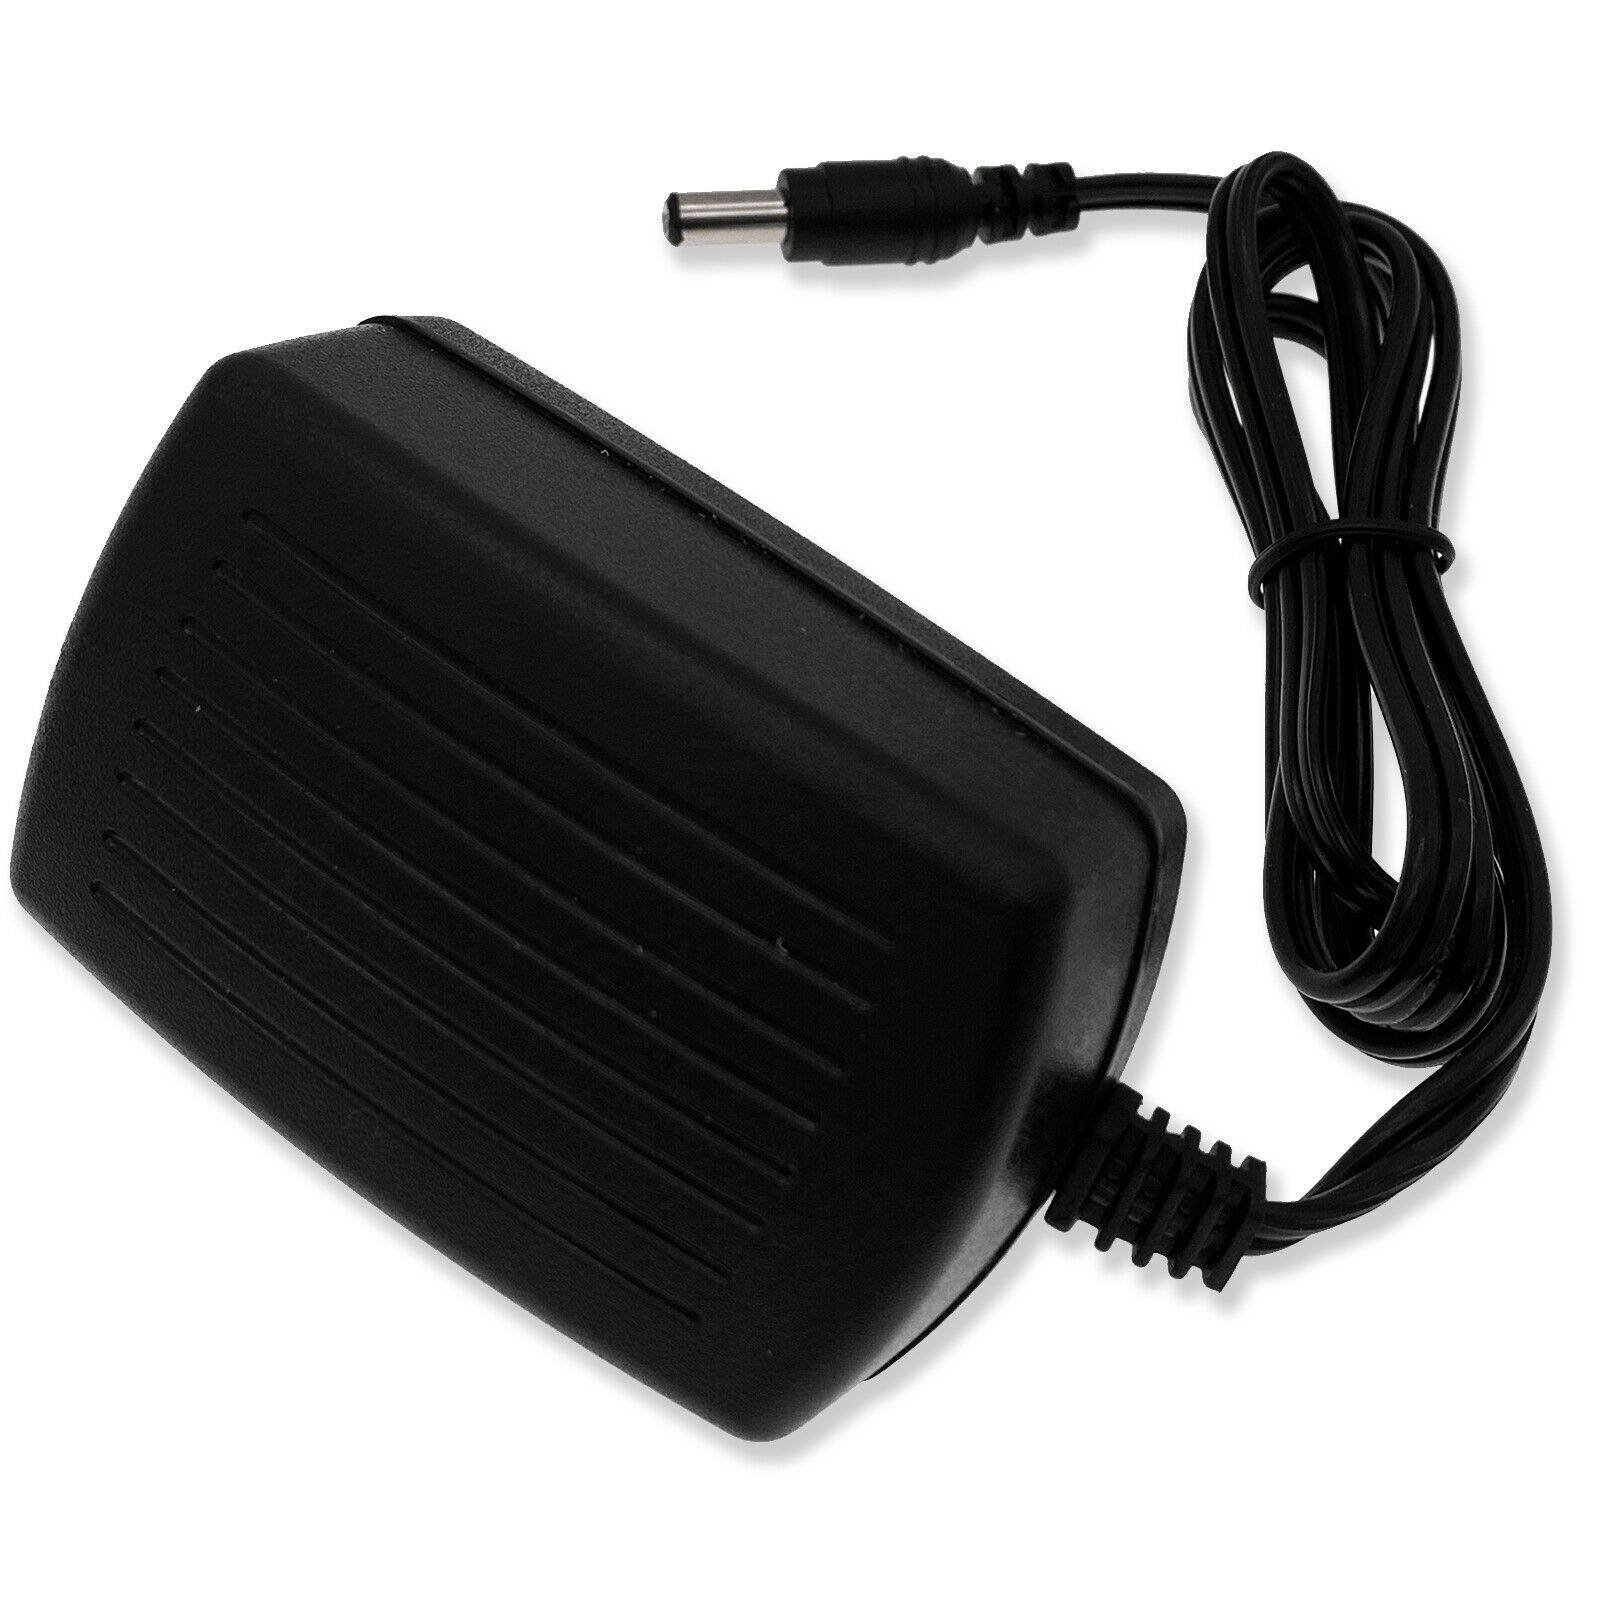 AC Power Adapter For Yamaha PA130 PA150 PA-150B Keyboards Guitars Digital Drums Brand Unbranded Color Black Compat